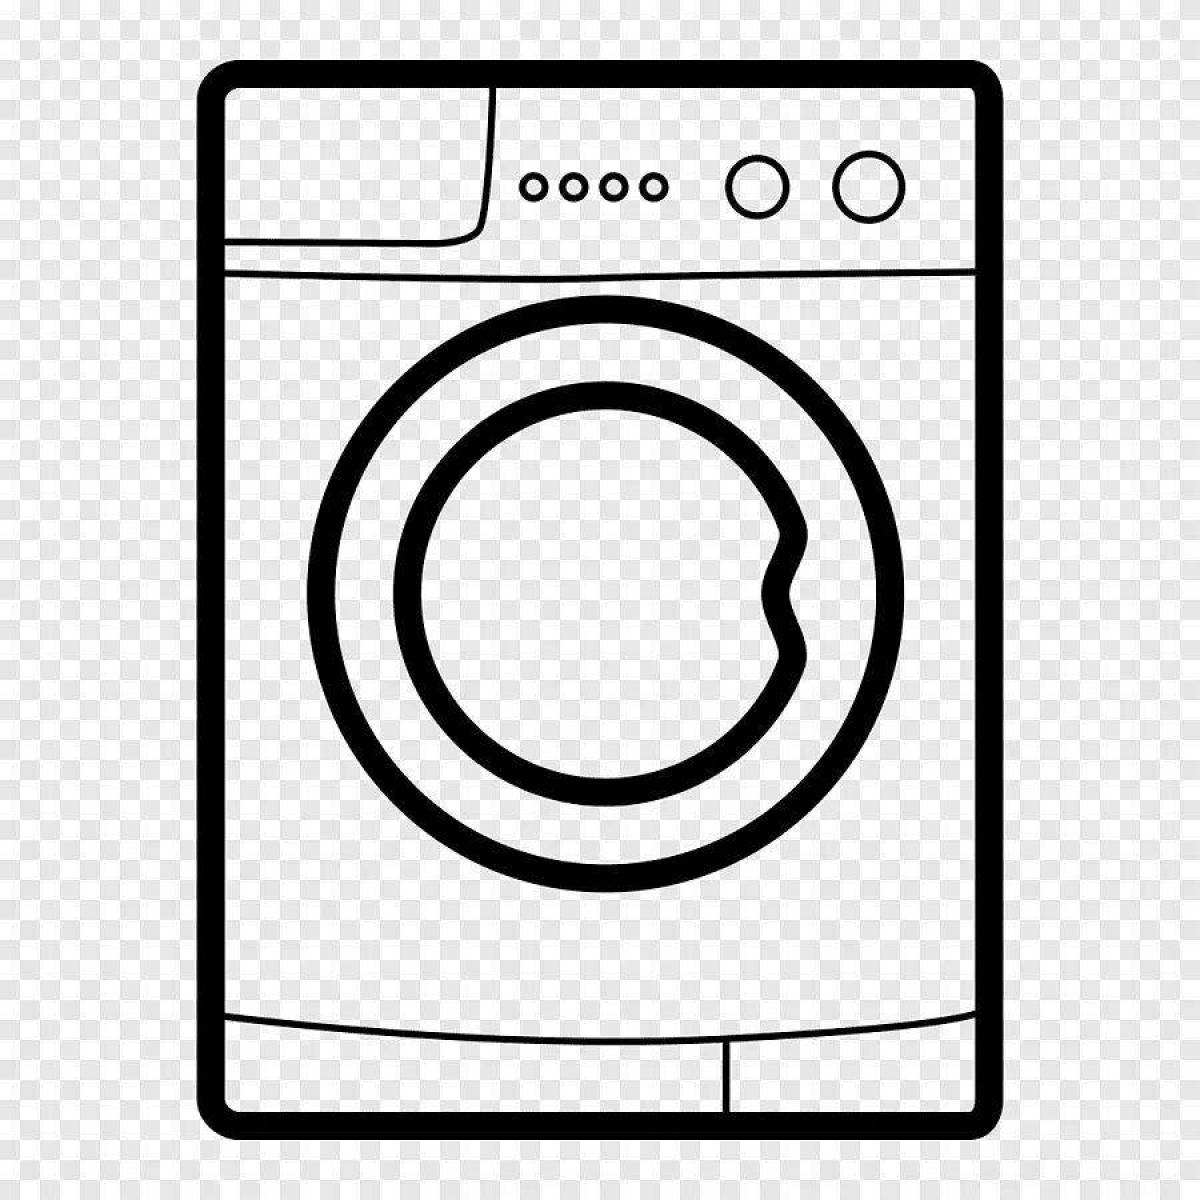 Great washing machine coloring for kids